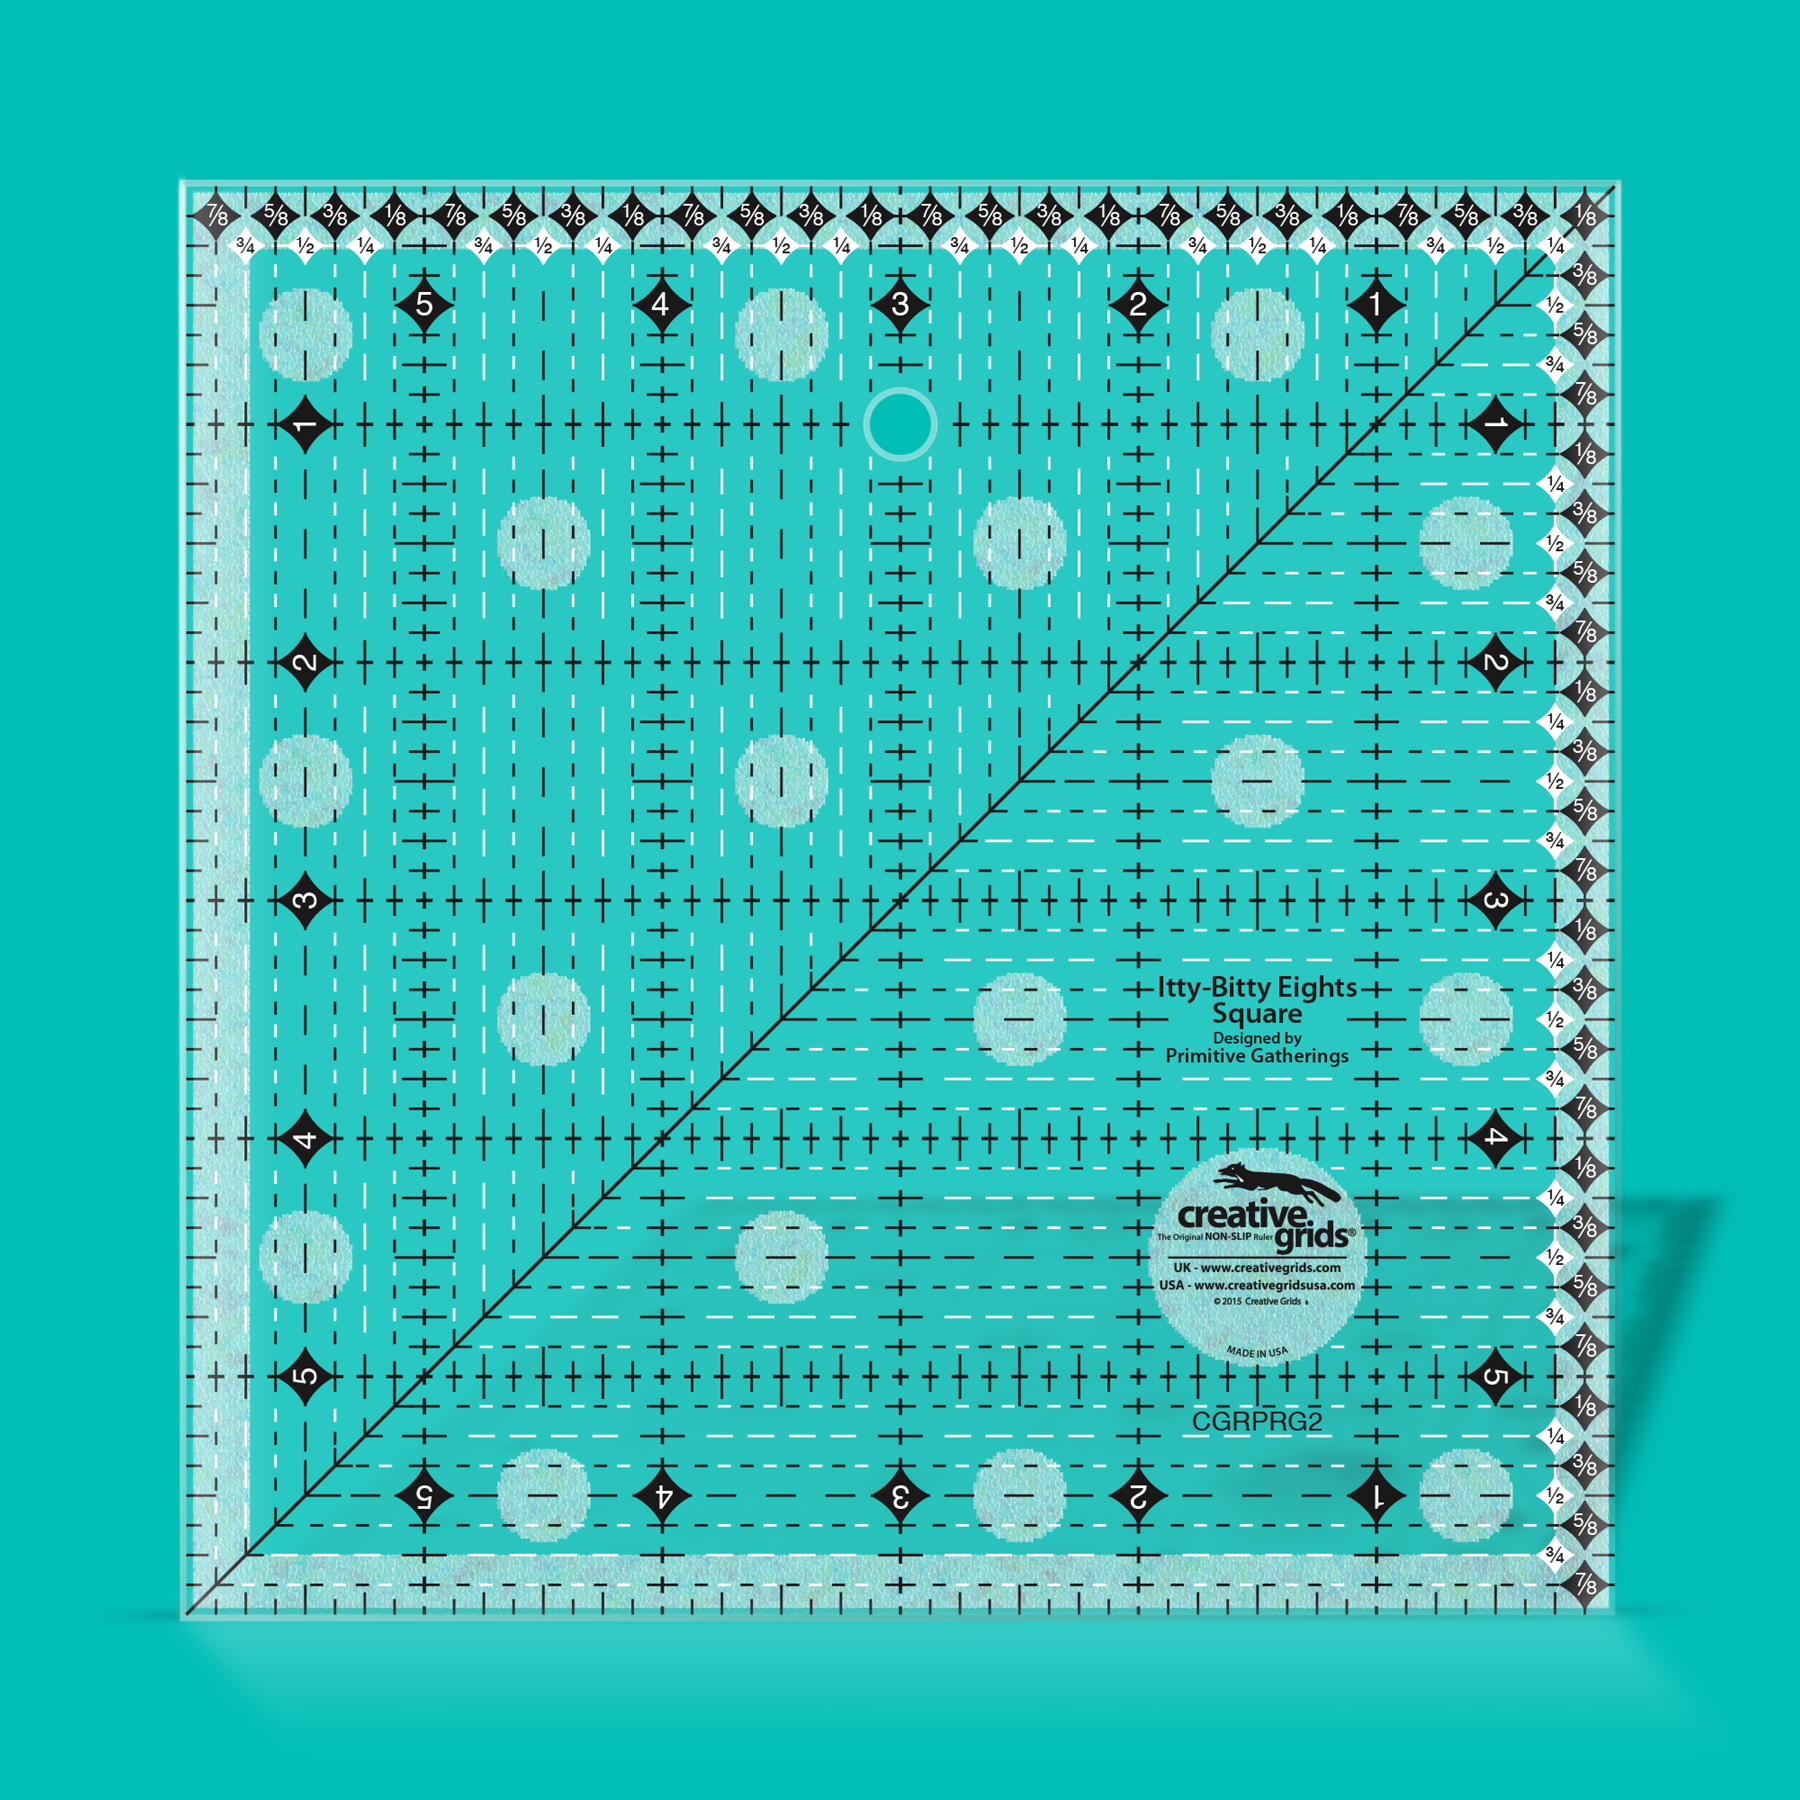 Creative Grids 6" Itty-Bitty Eights Square Ruler CGRPRG2 for Sale at World Weidner